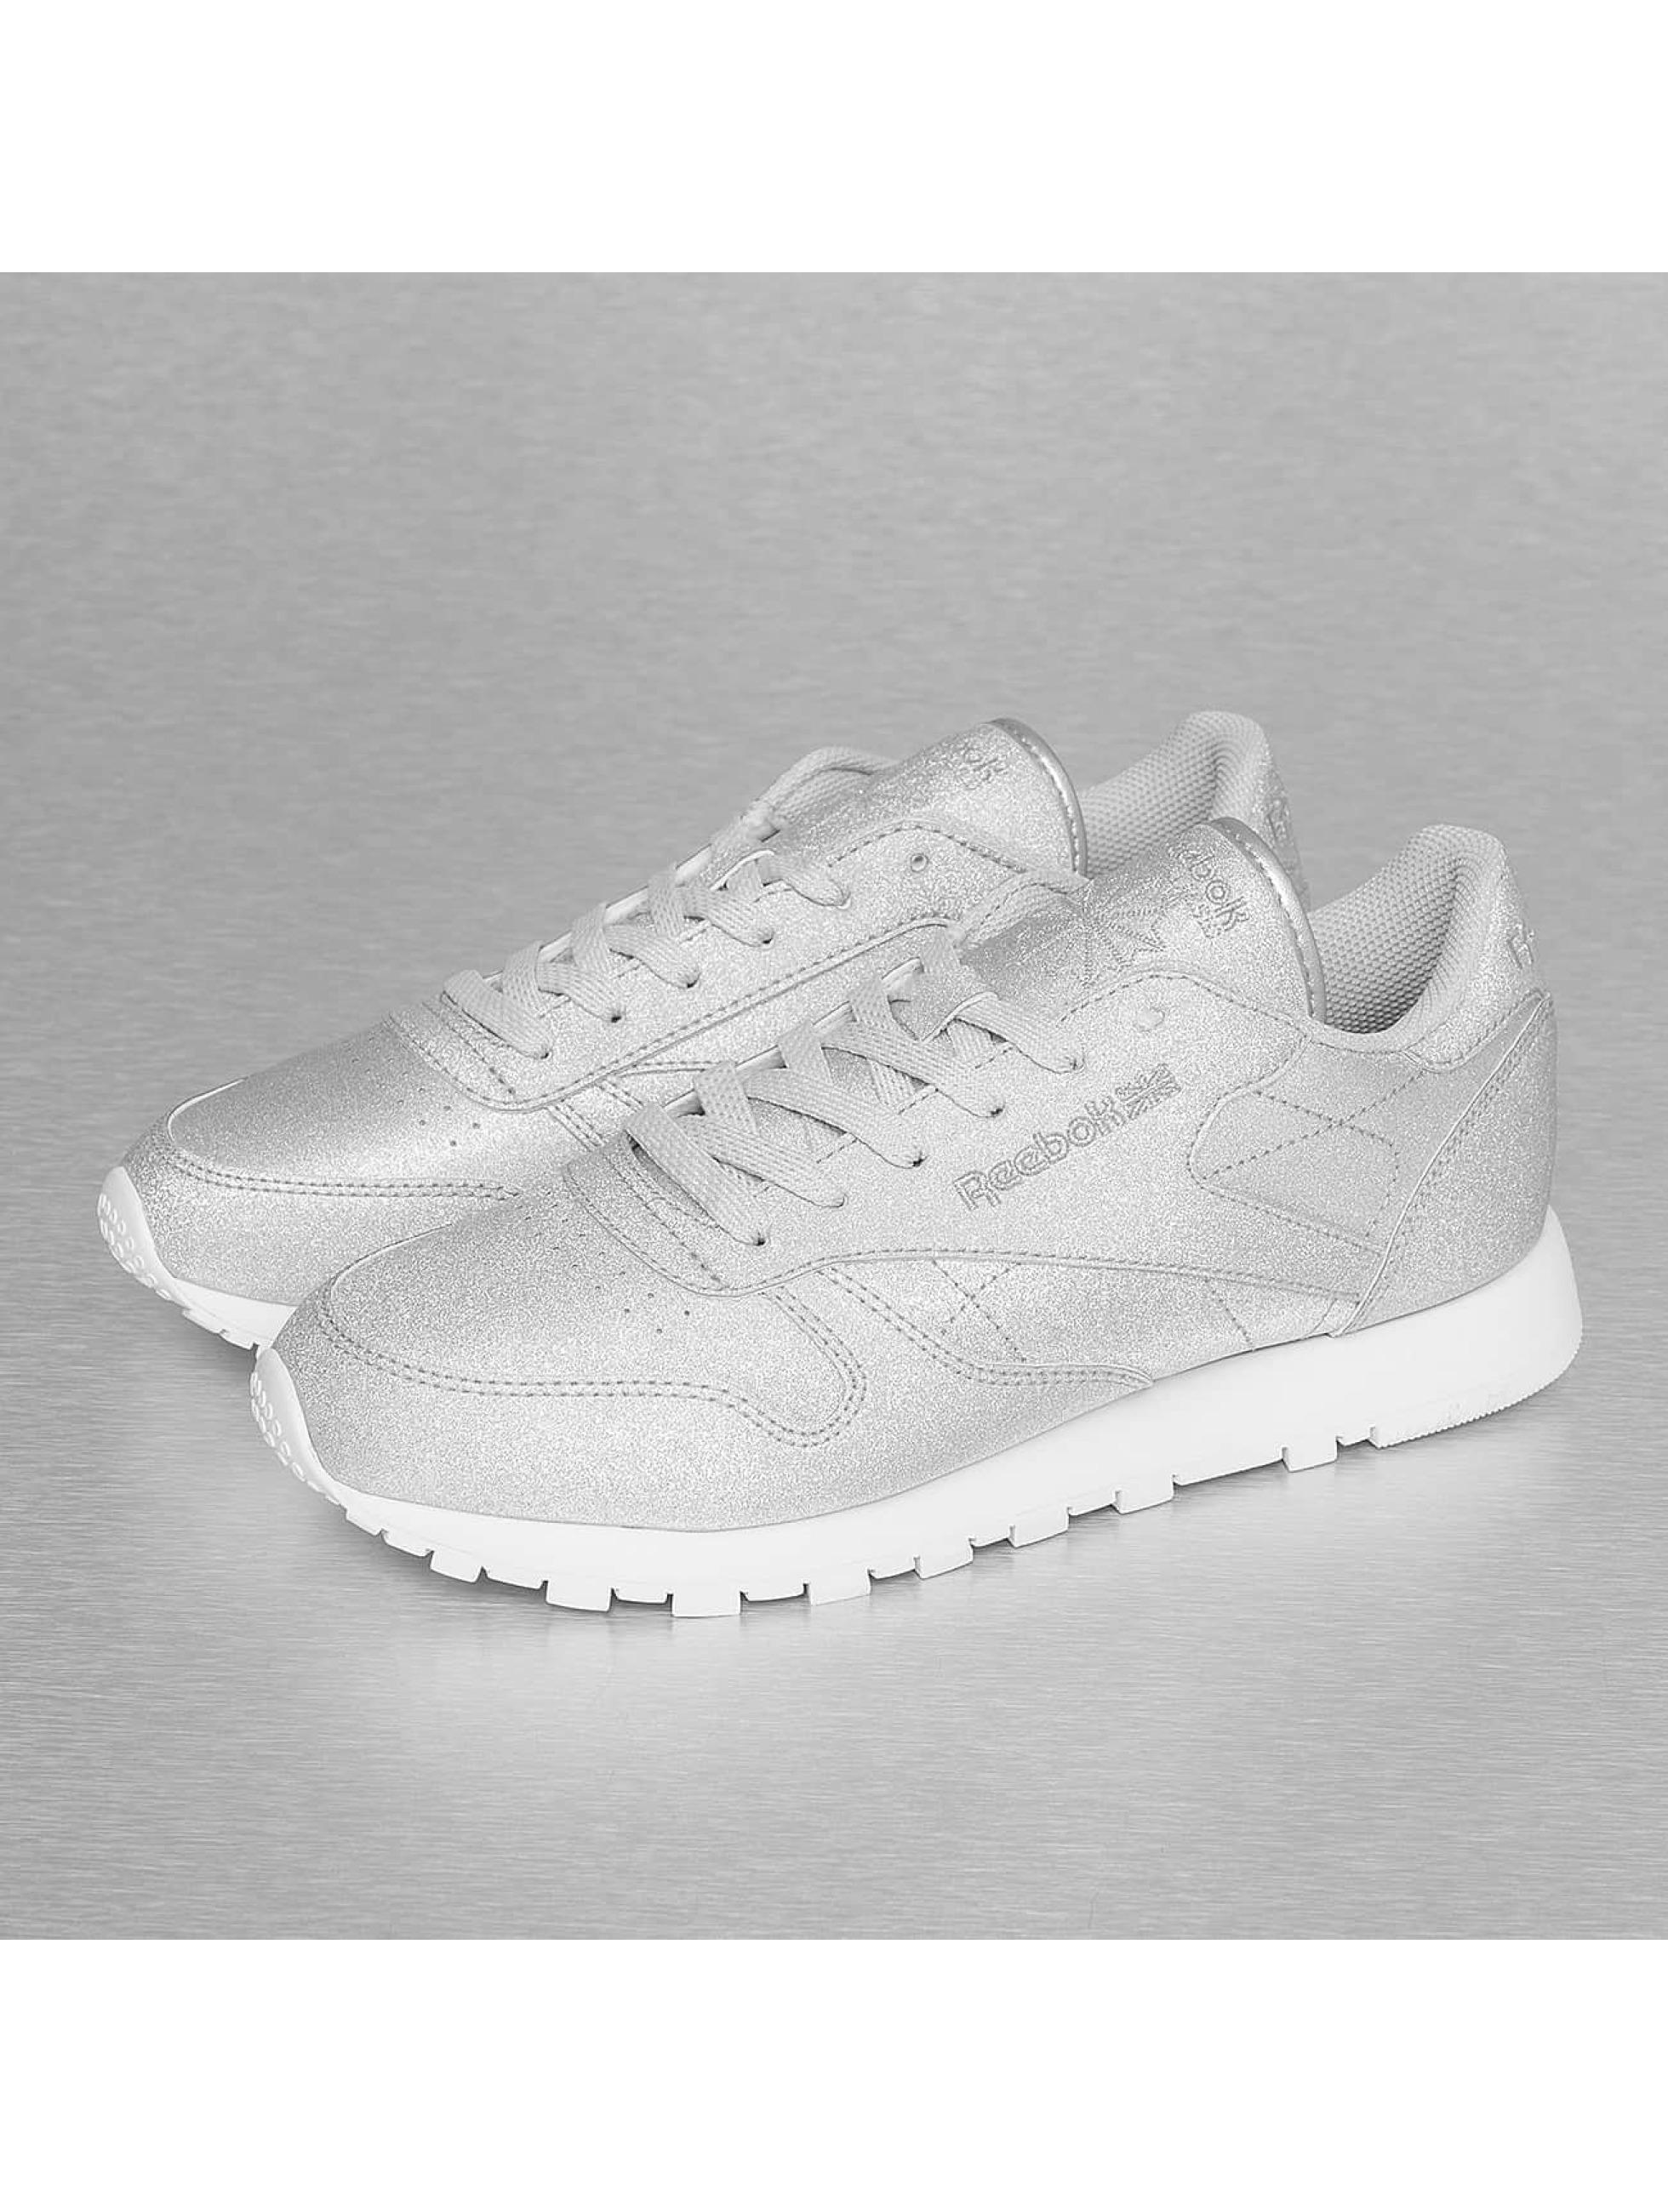 Reebok Chaussures / Baskets Leather SYN en argent